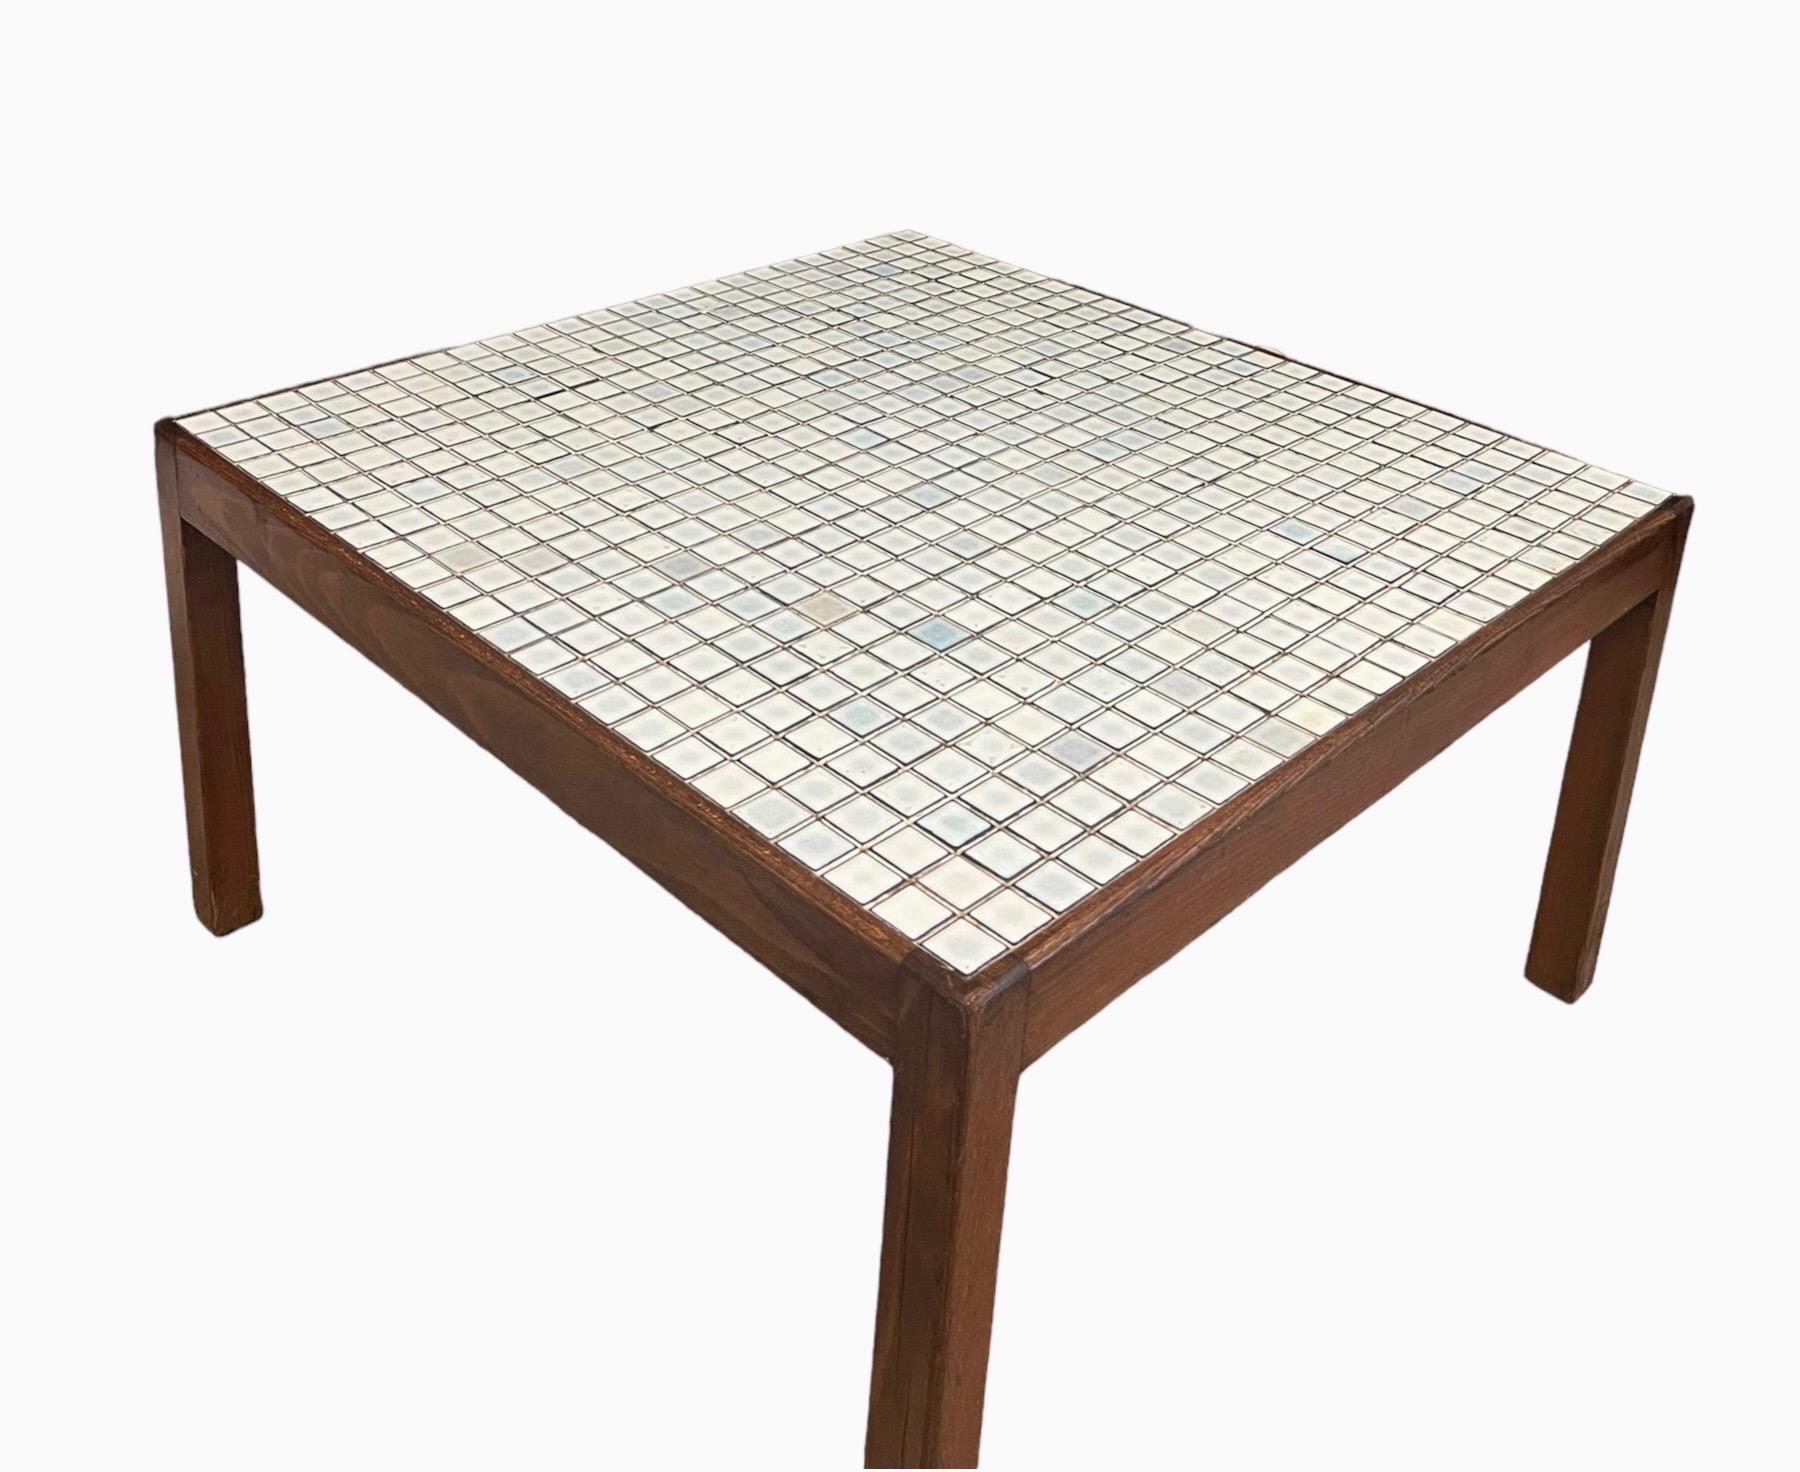 Late 20th Century Vintage Mid Century Modern Walnut Table With Tile Top For Sale